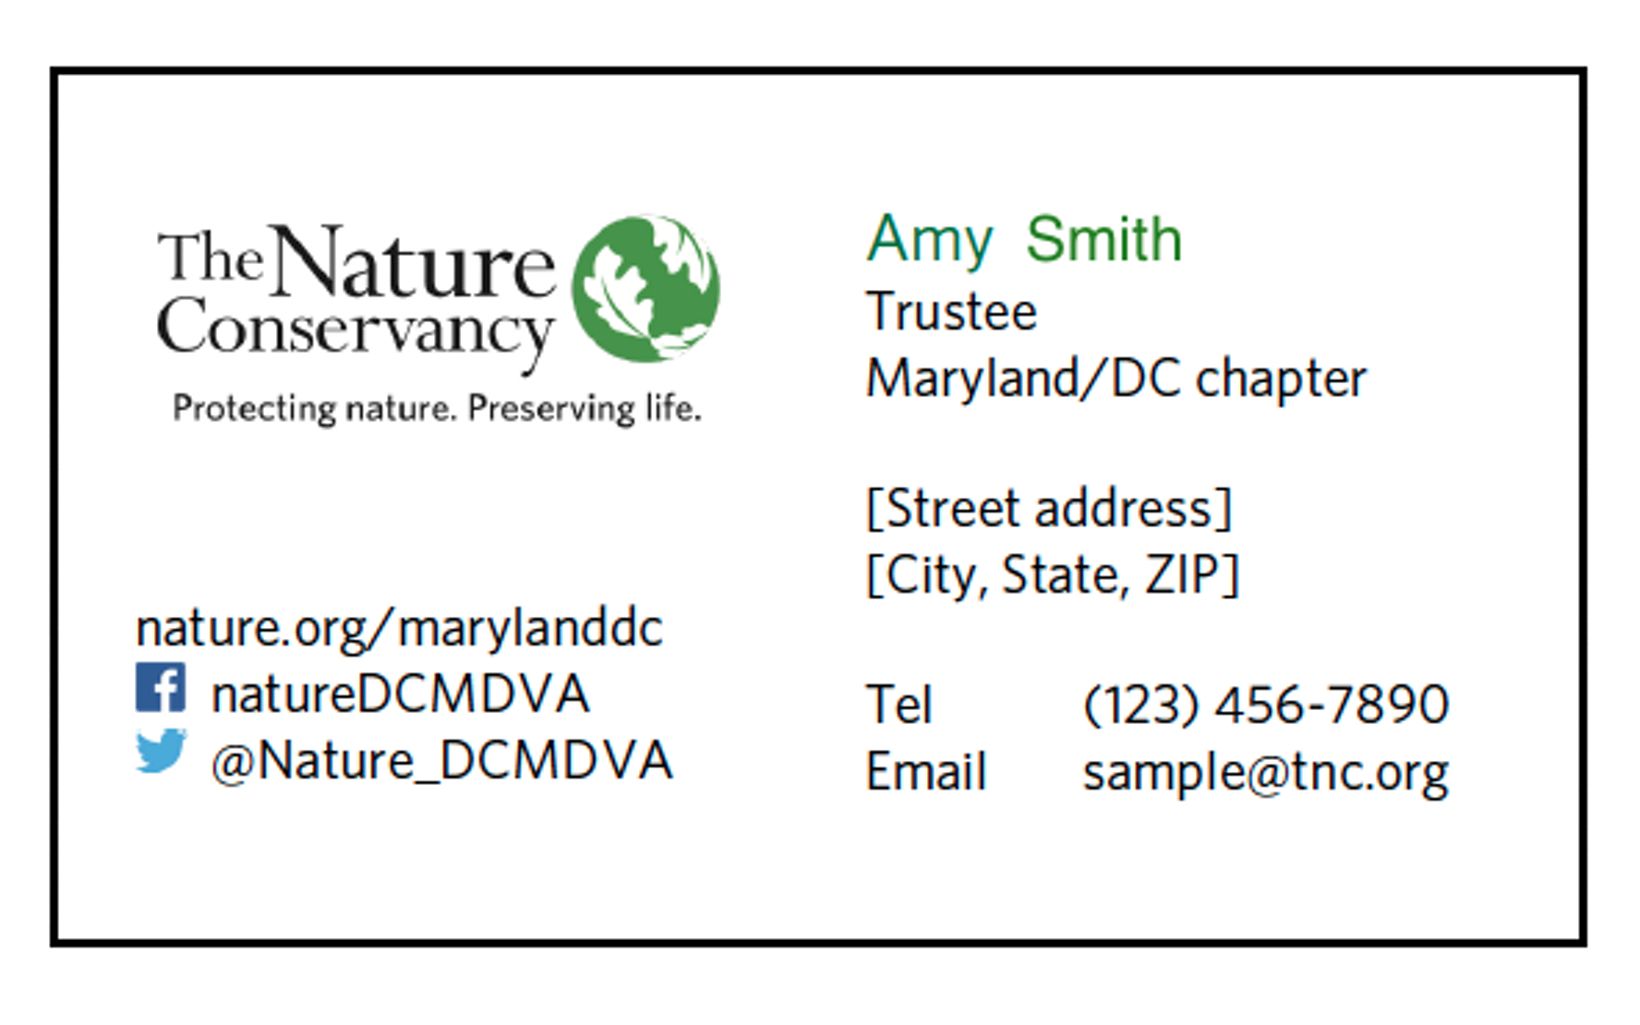 Business card design for Maryland/DC trustees including chapter vanity URL. 